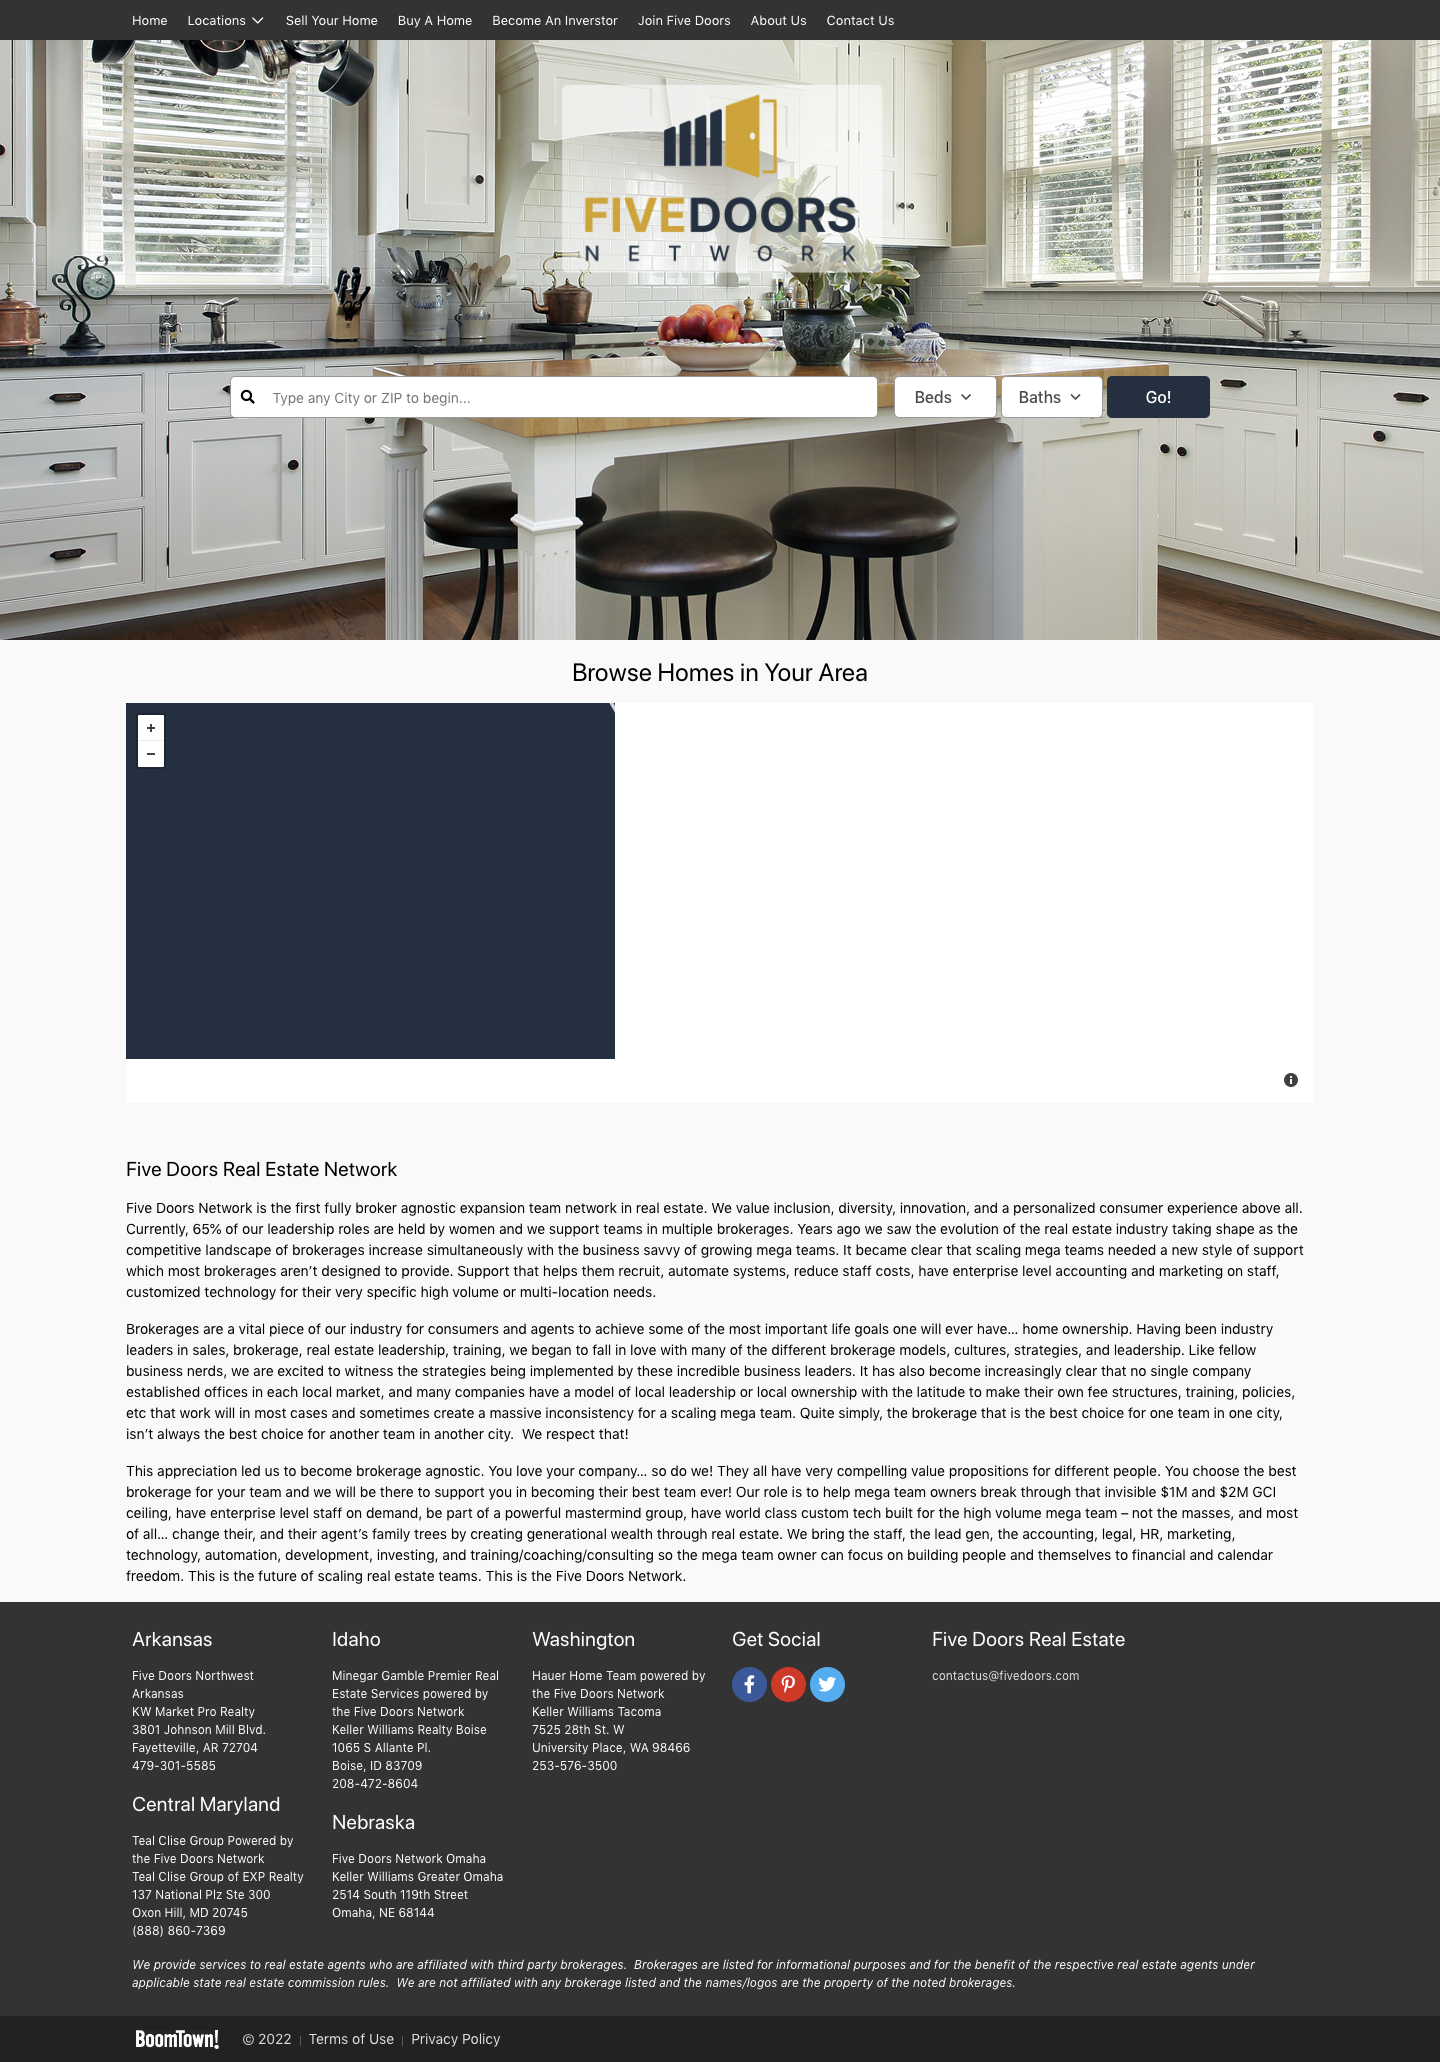 five doors real estate website example home page from BoomTown ROI